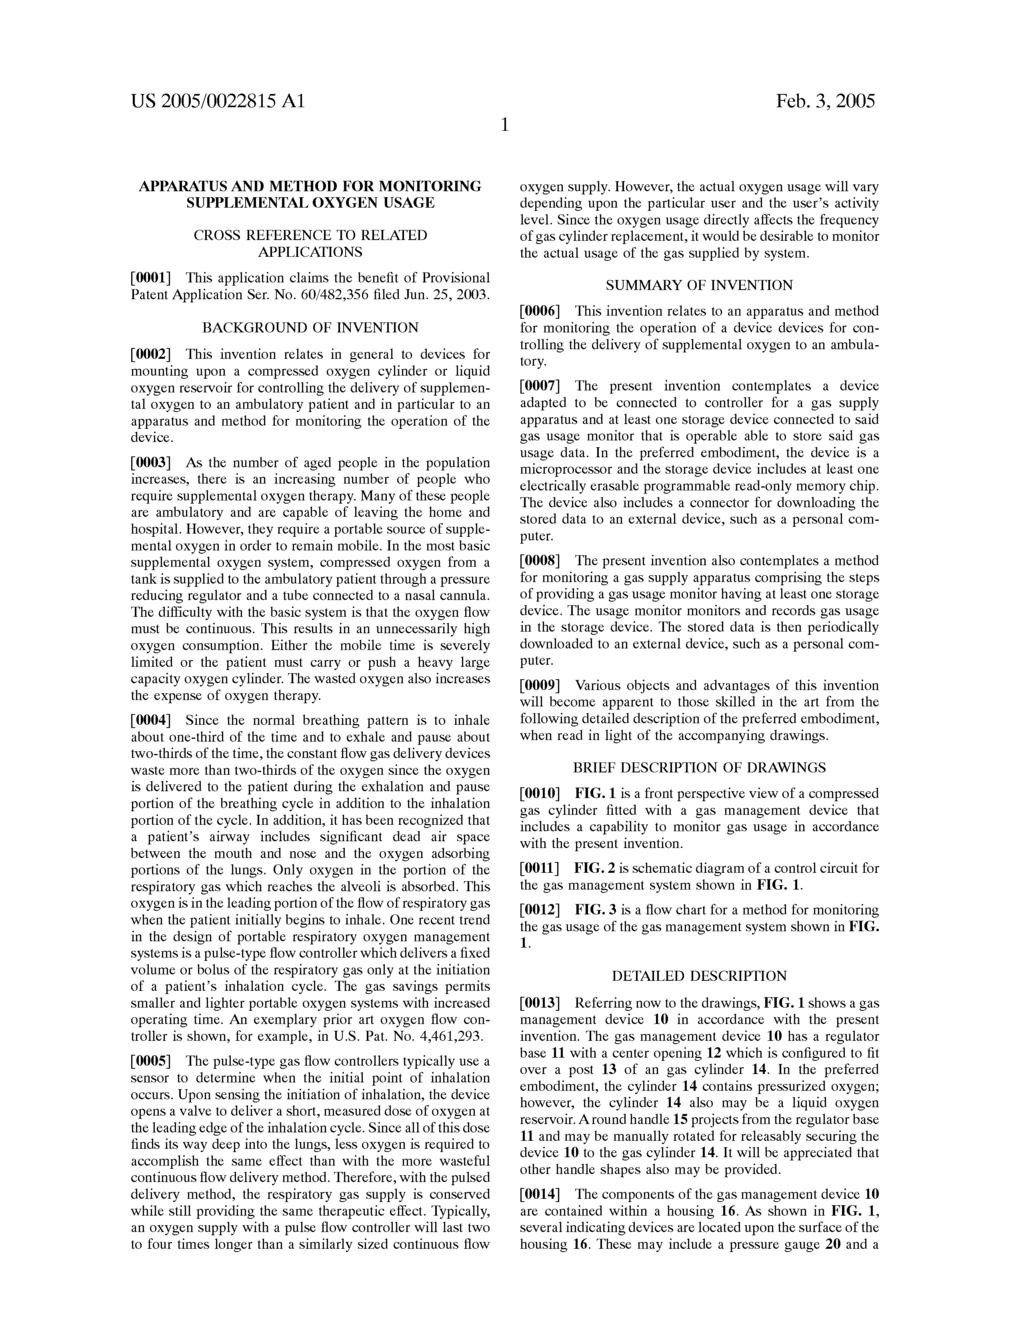 APPARATUS AND METHOD FORMONITORING SUPPLEMENTAL OXYGEN USAGE CROSS REFERENCE TO RELATED APPLICATIONS 0001. This application claims the benefit of Provisional Patent Application Ser. No.